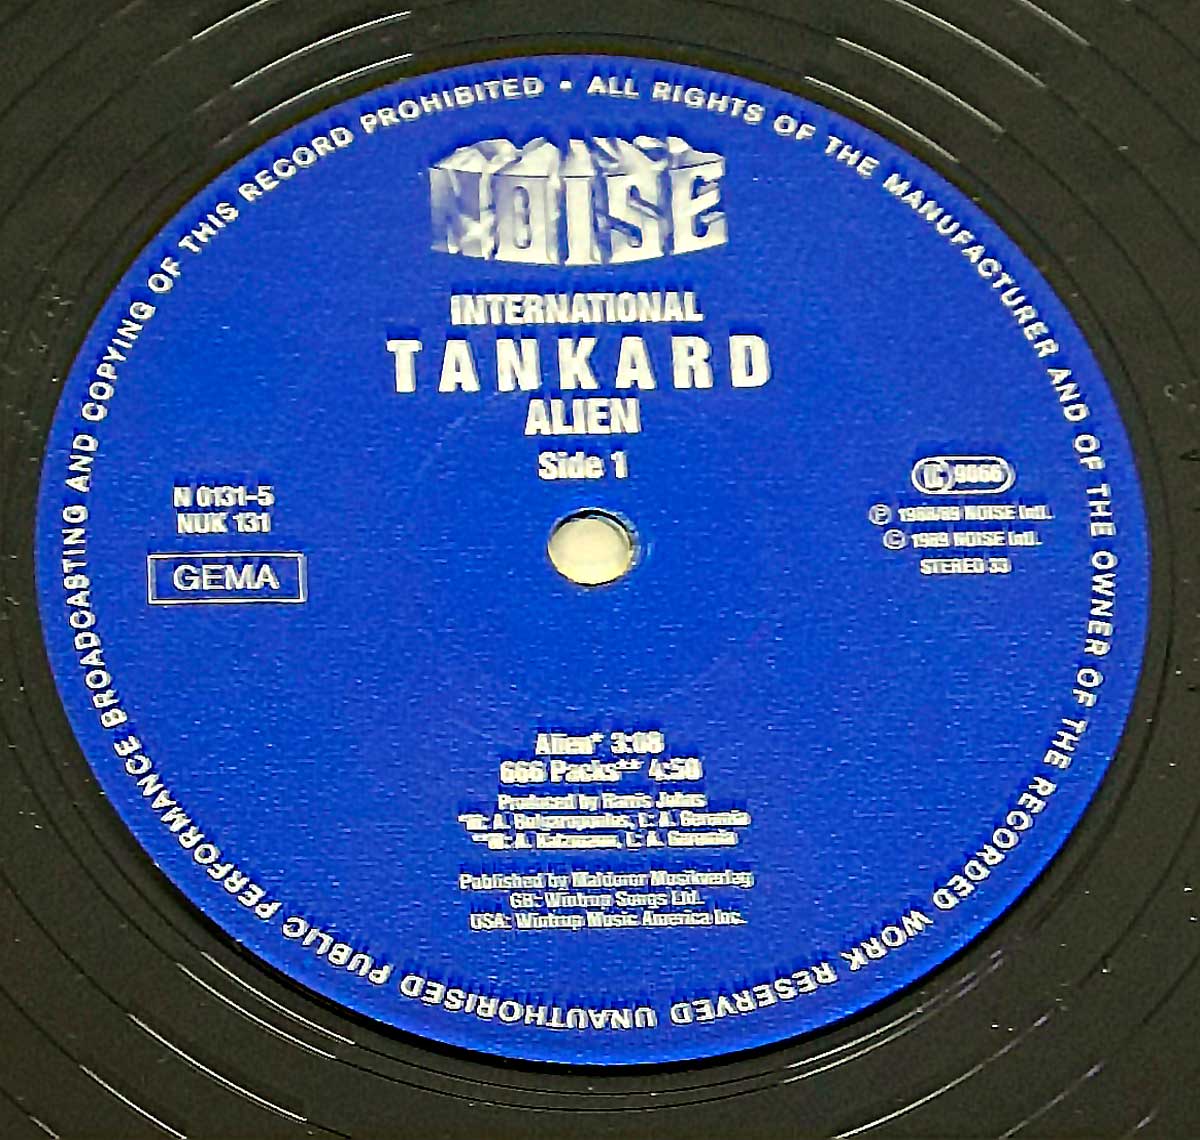 Close-up of the Blue NOISE International N 0131-5 Record Label Side 1 